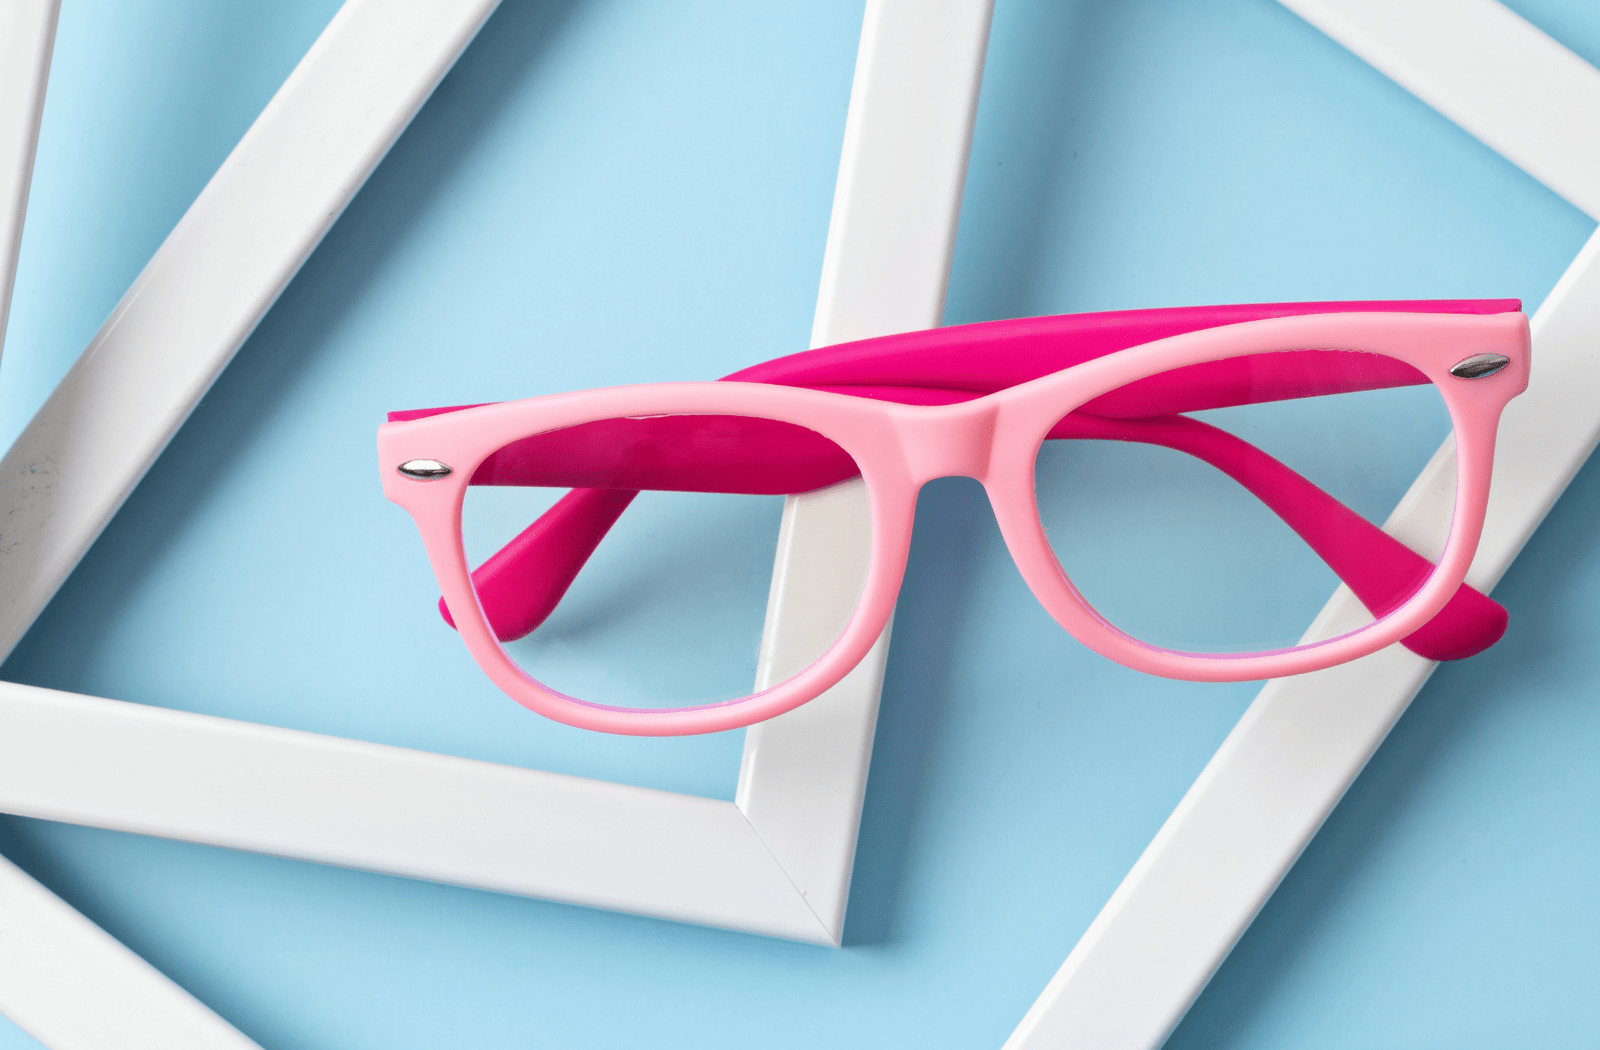 A pair of pink children's glasses sitting on a blue background with picture frames behind it